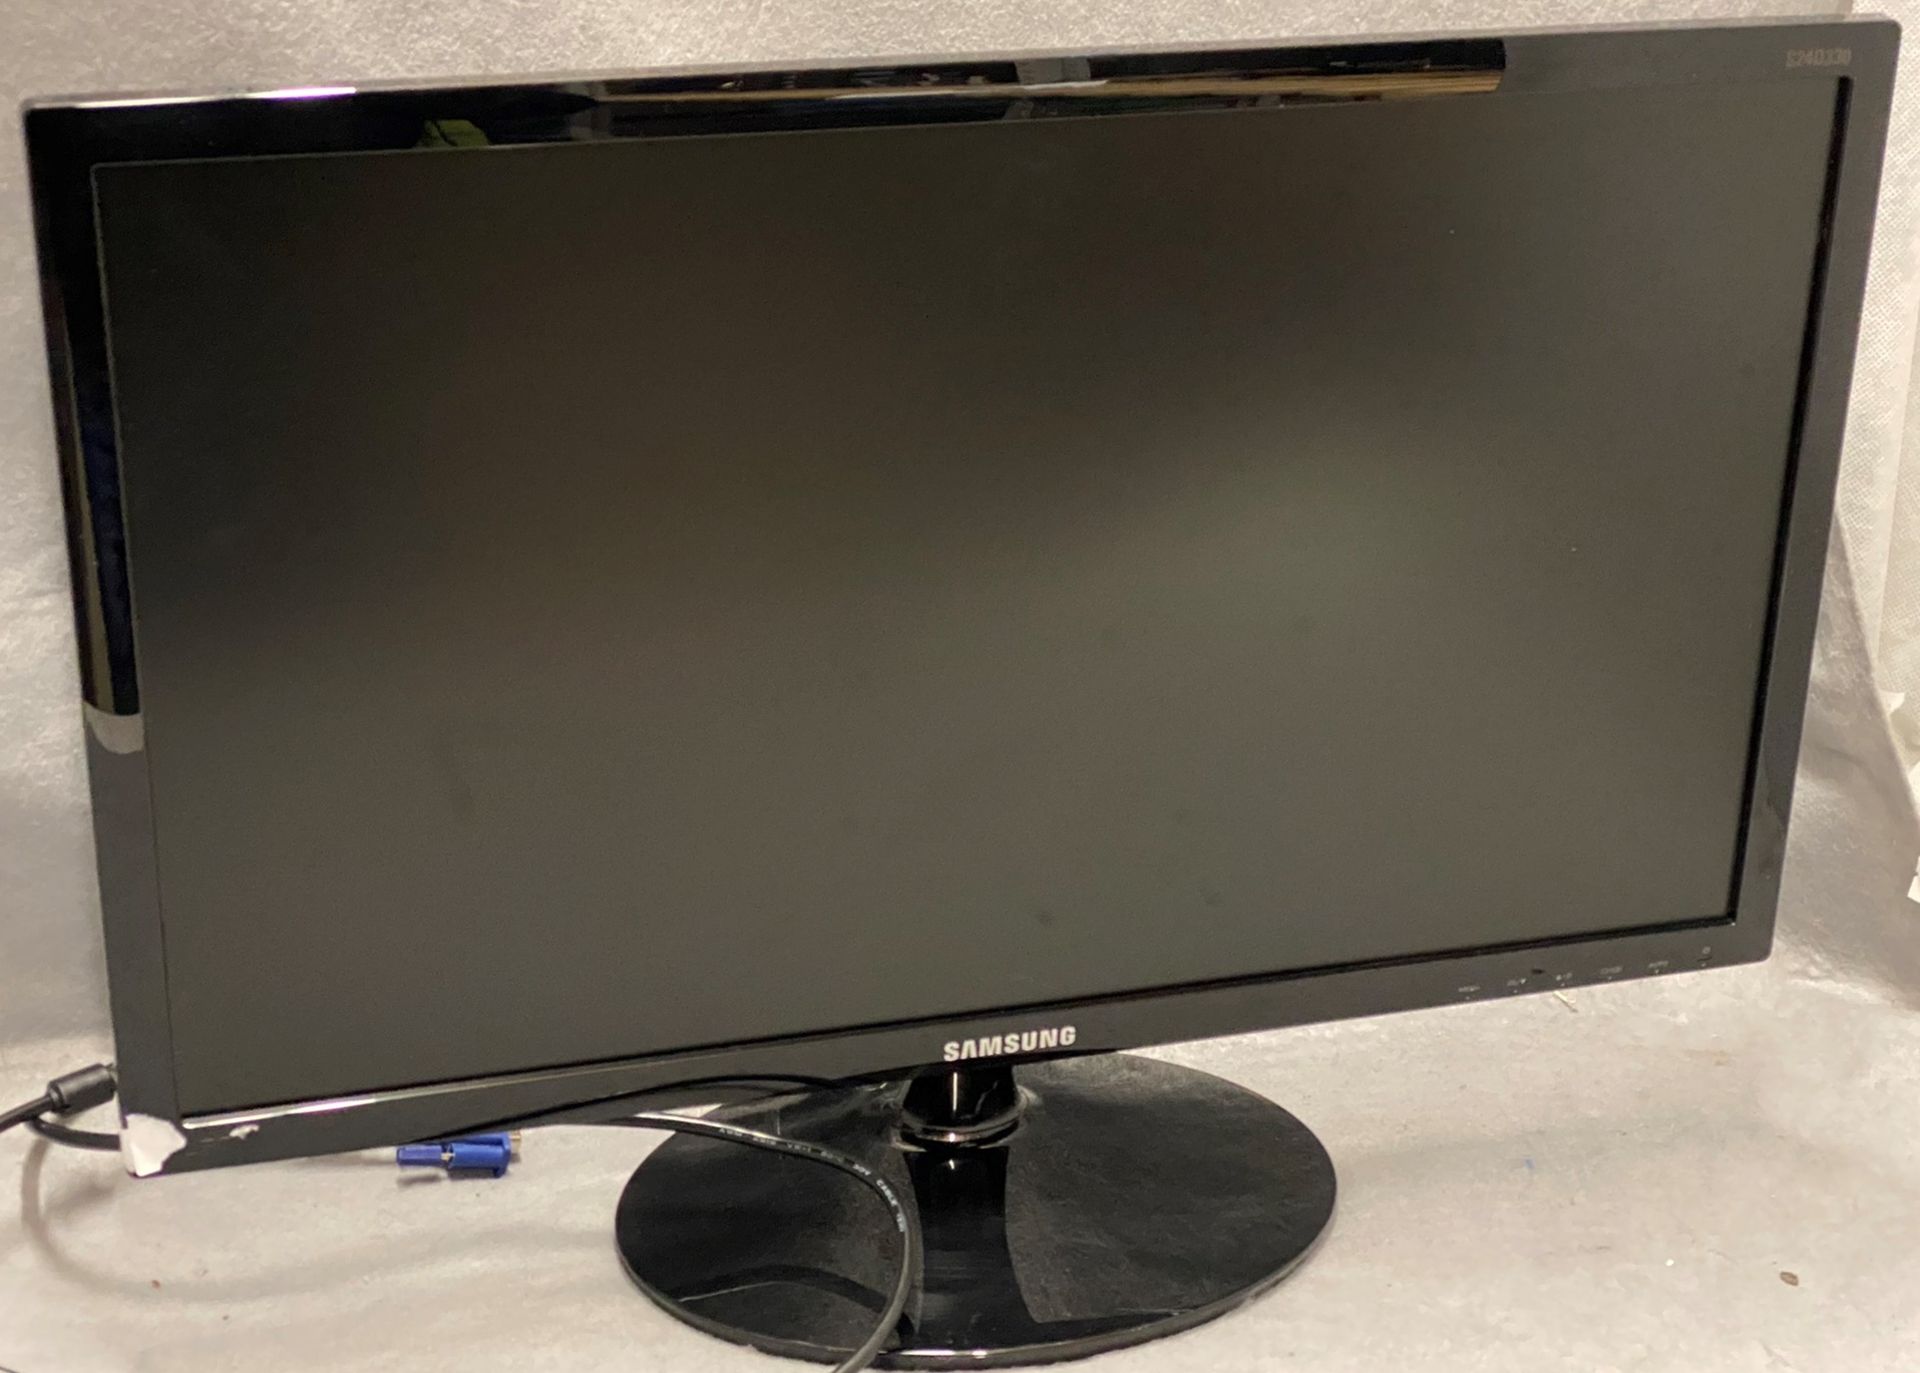 Samsung 24" free standing computer monitor on oval base,